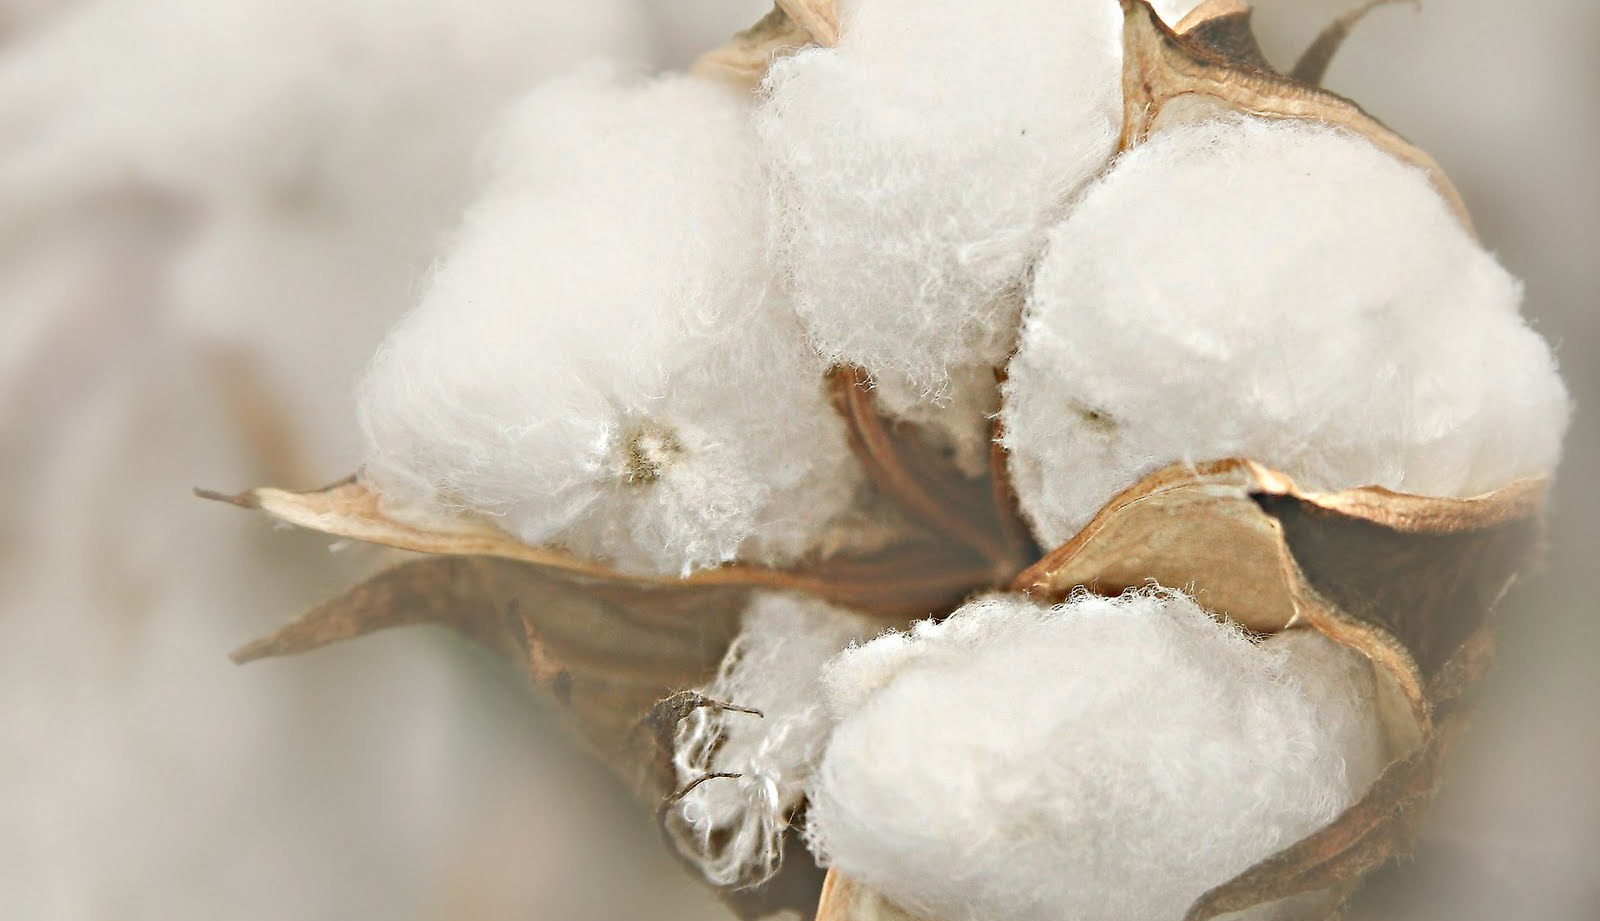 All American Cotton by the Numbers, Blog